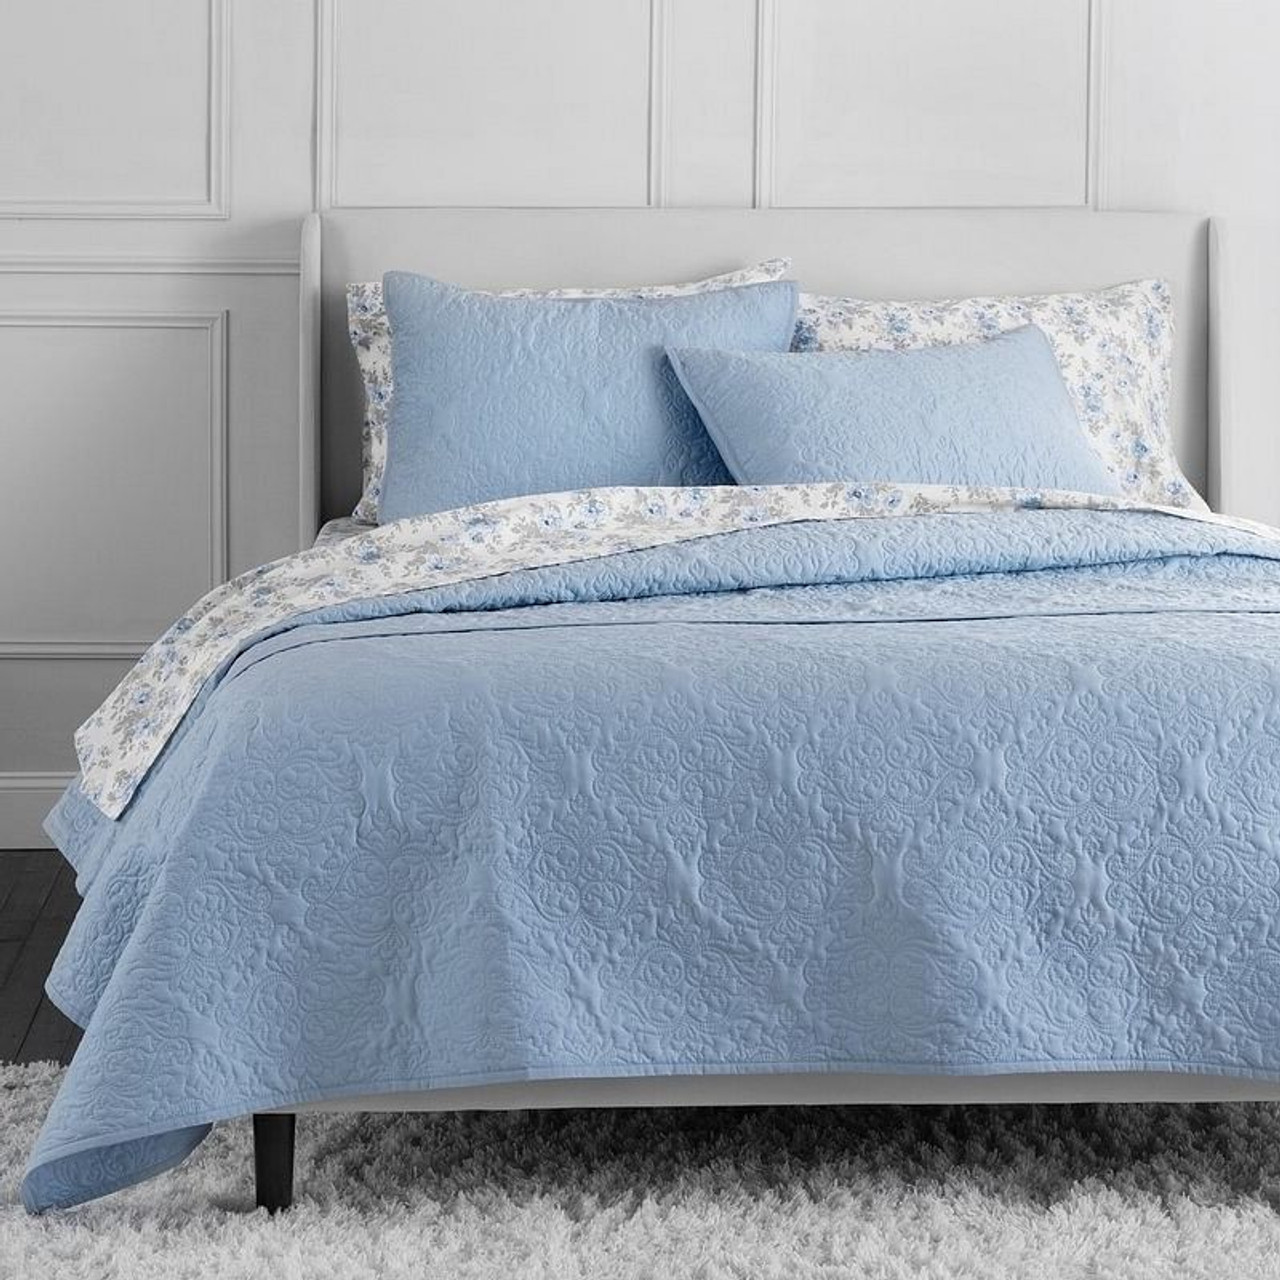 Queen Size Cotton 3-Piece Quilt Set in Blue with Quilted Damask Pattern